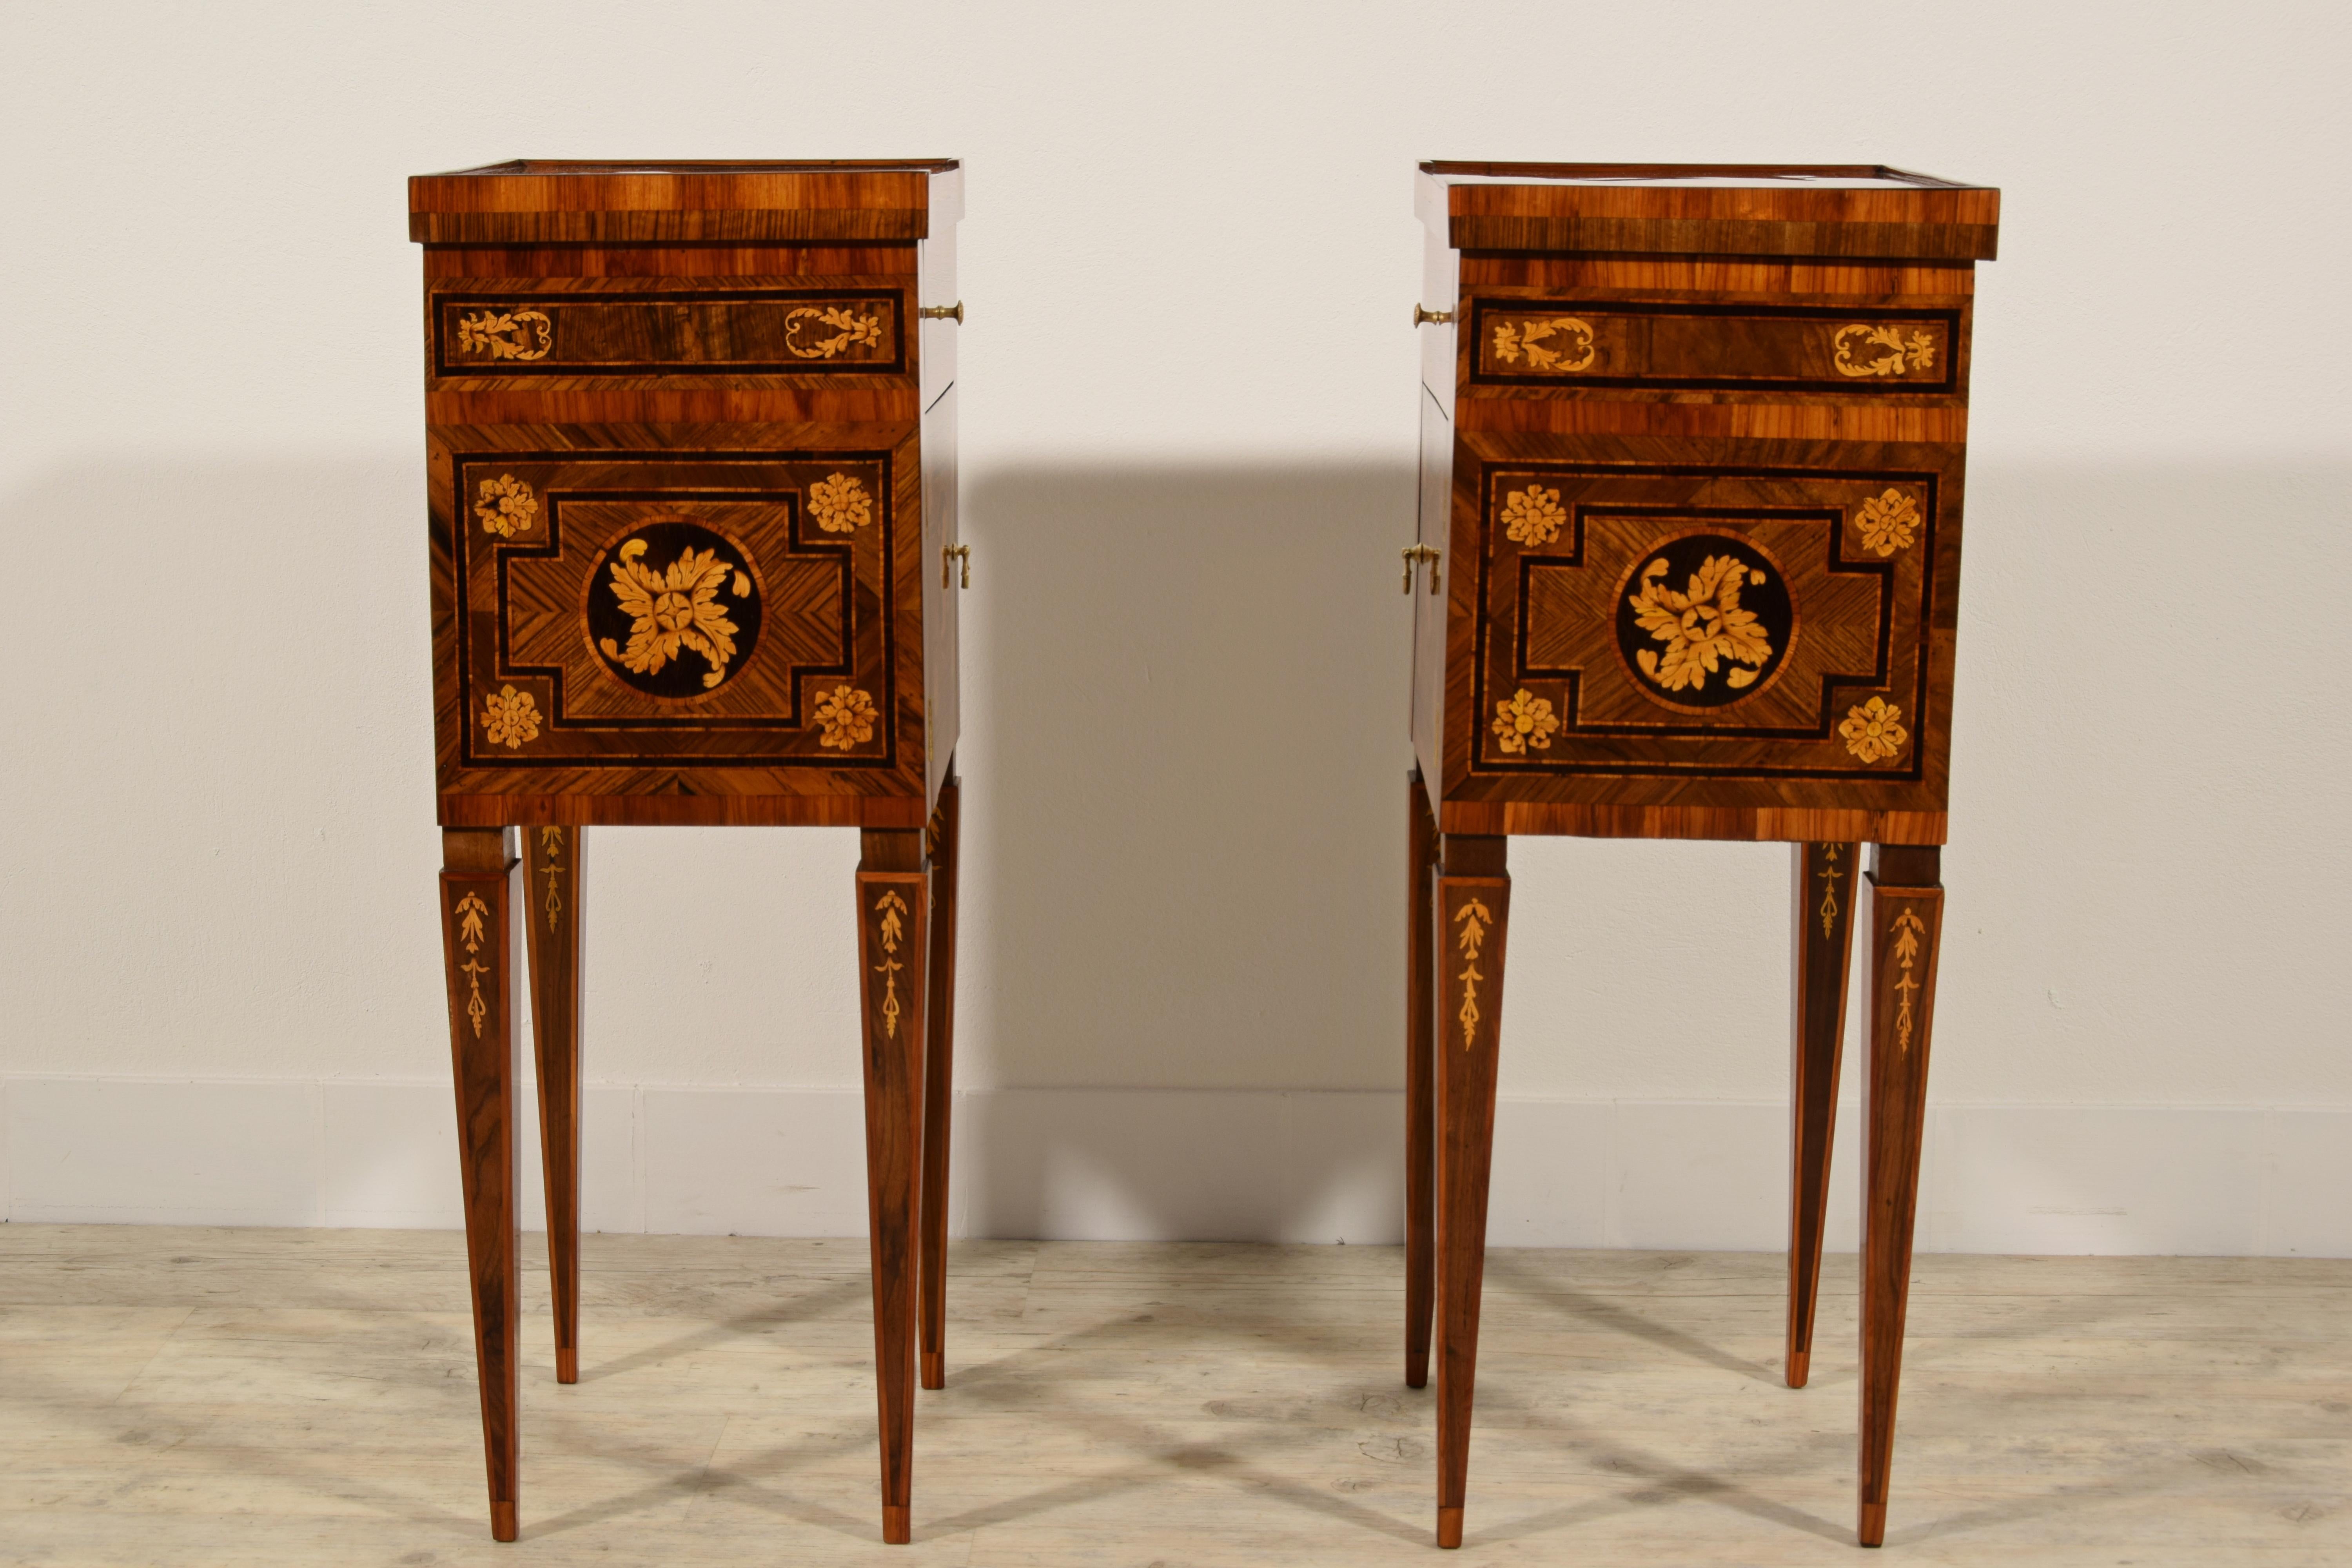 18th Century, Pair of Italian Neoclassical Inlaid Wood Bedside Tables 12